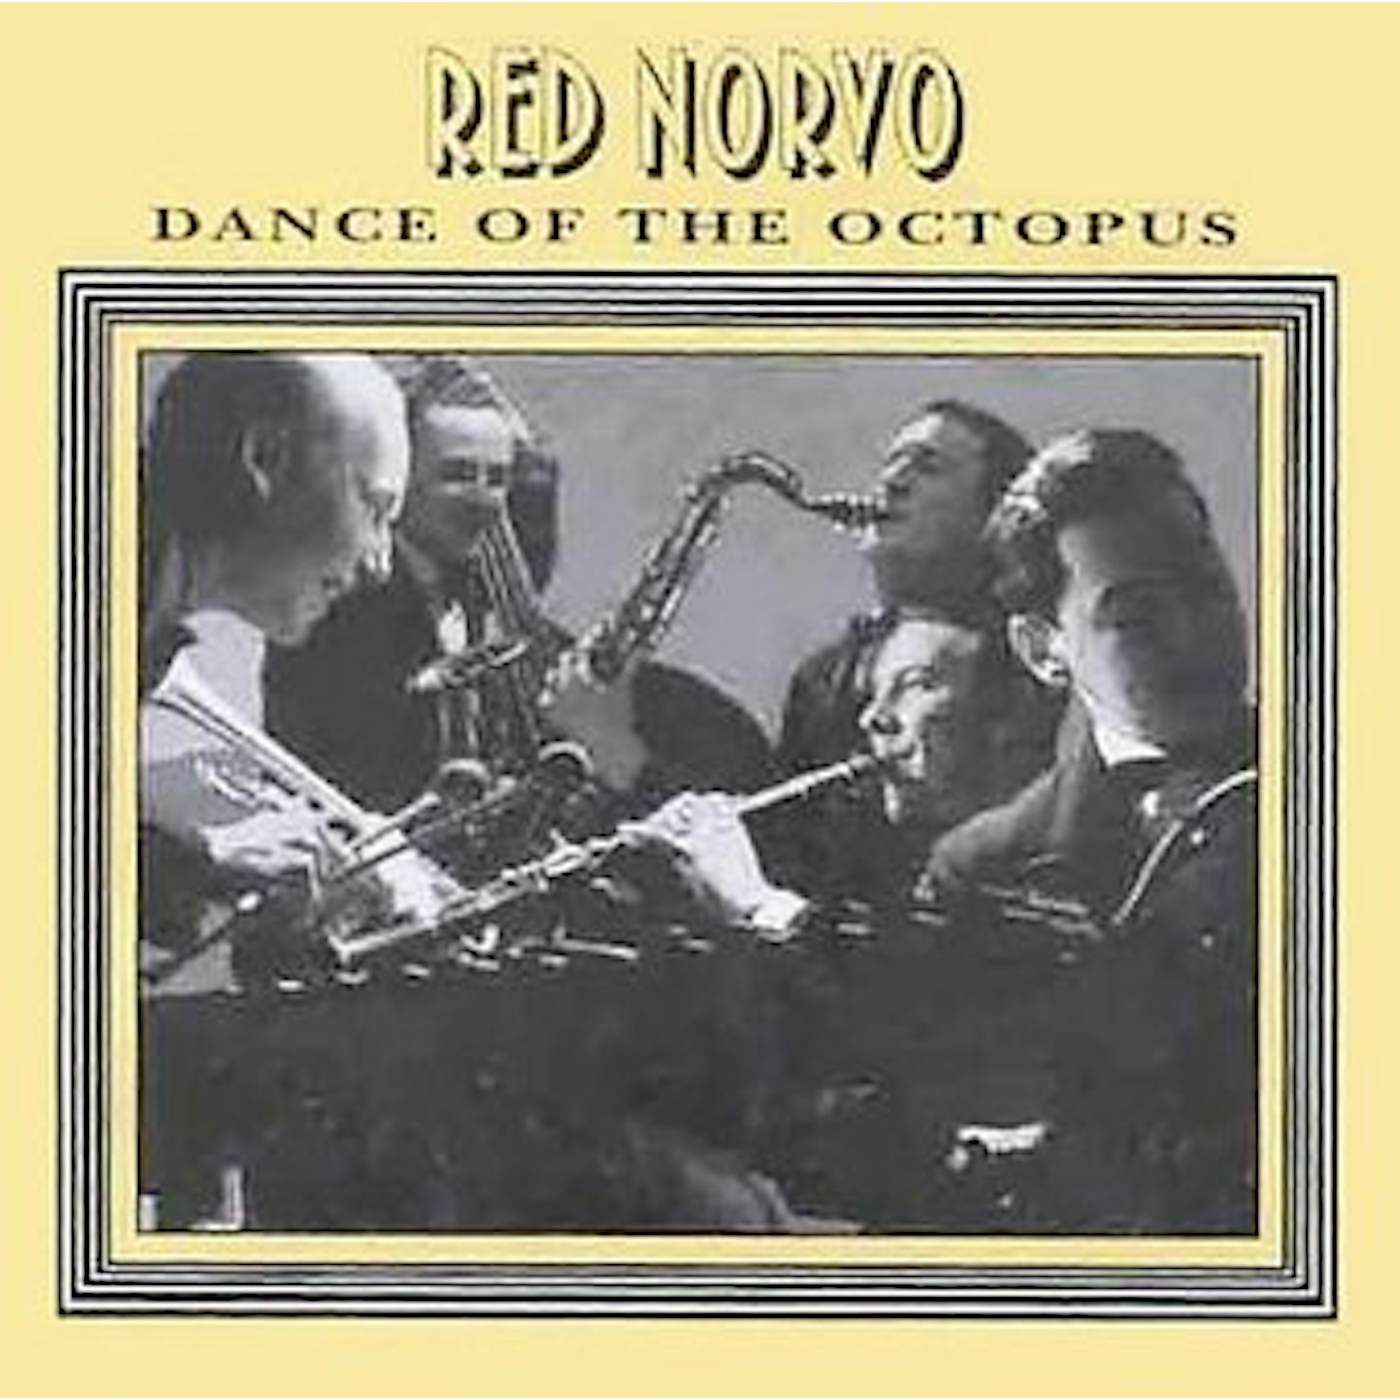 Red Norvo Dance of the Octopus CD